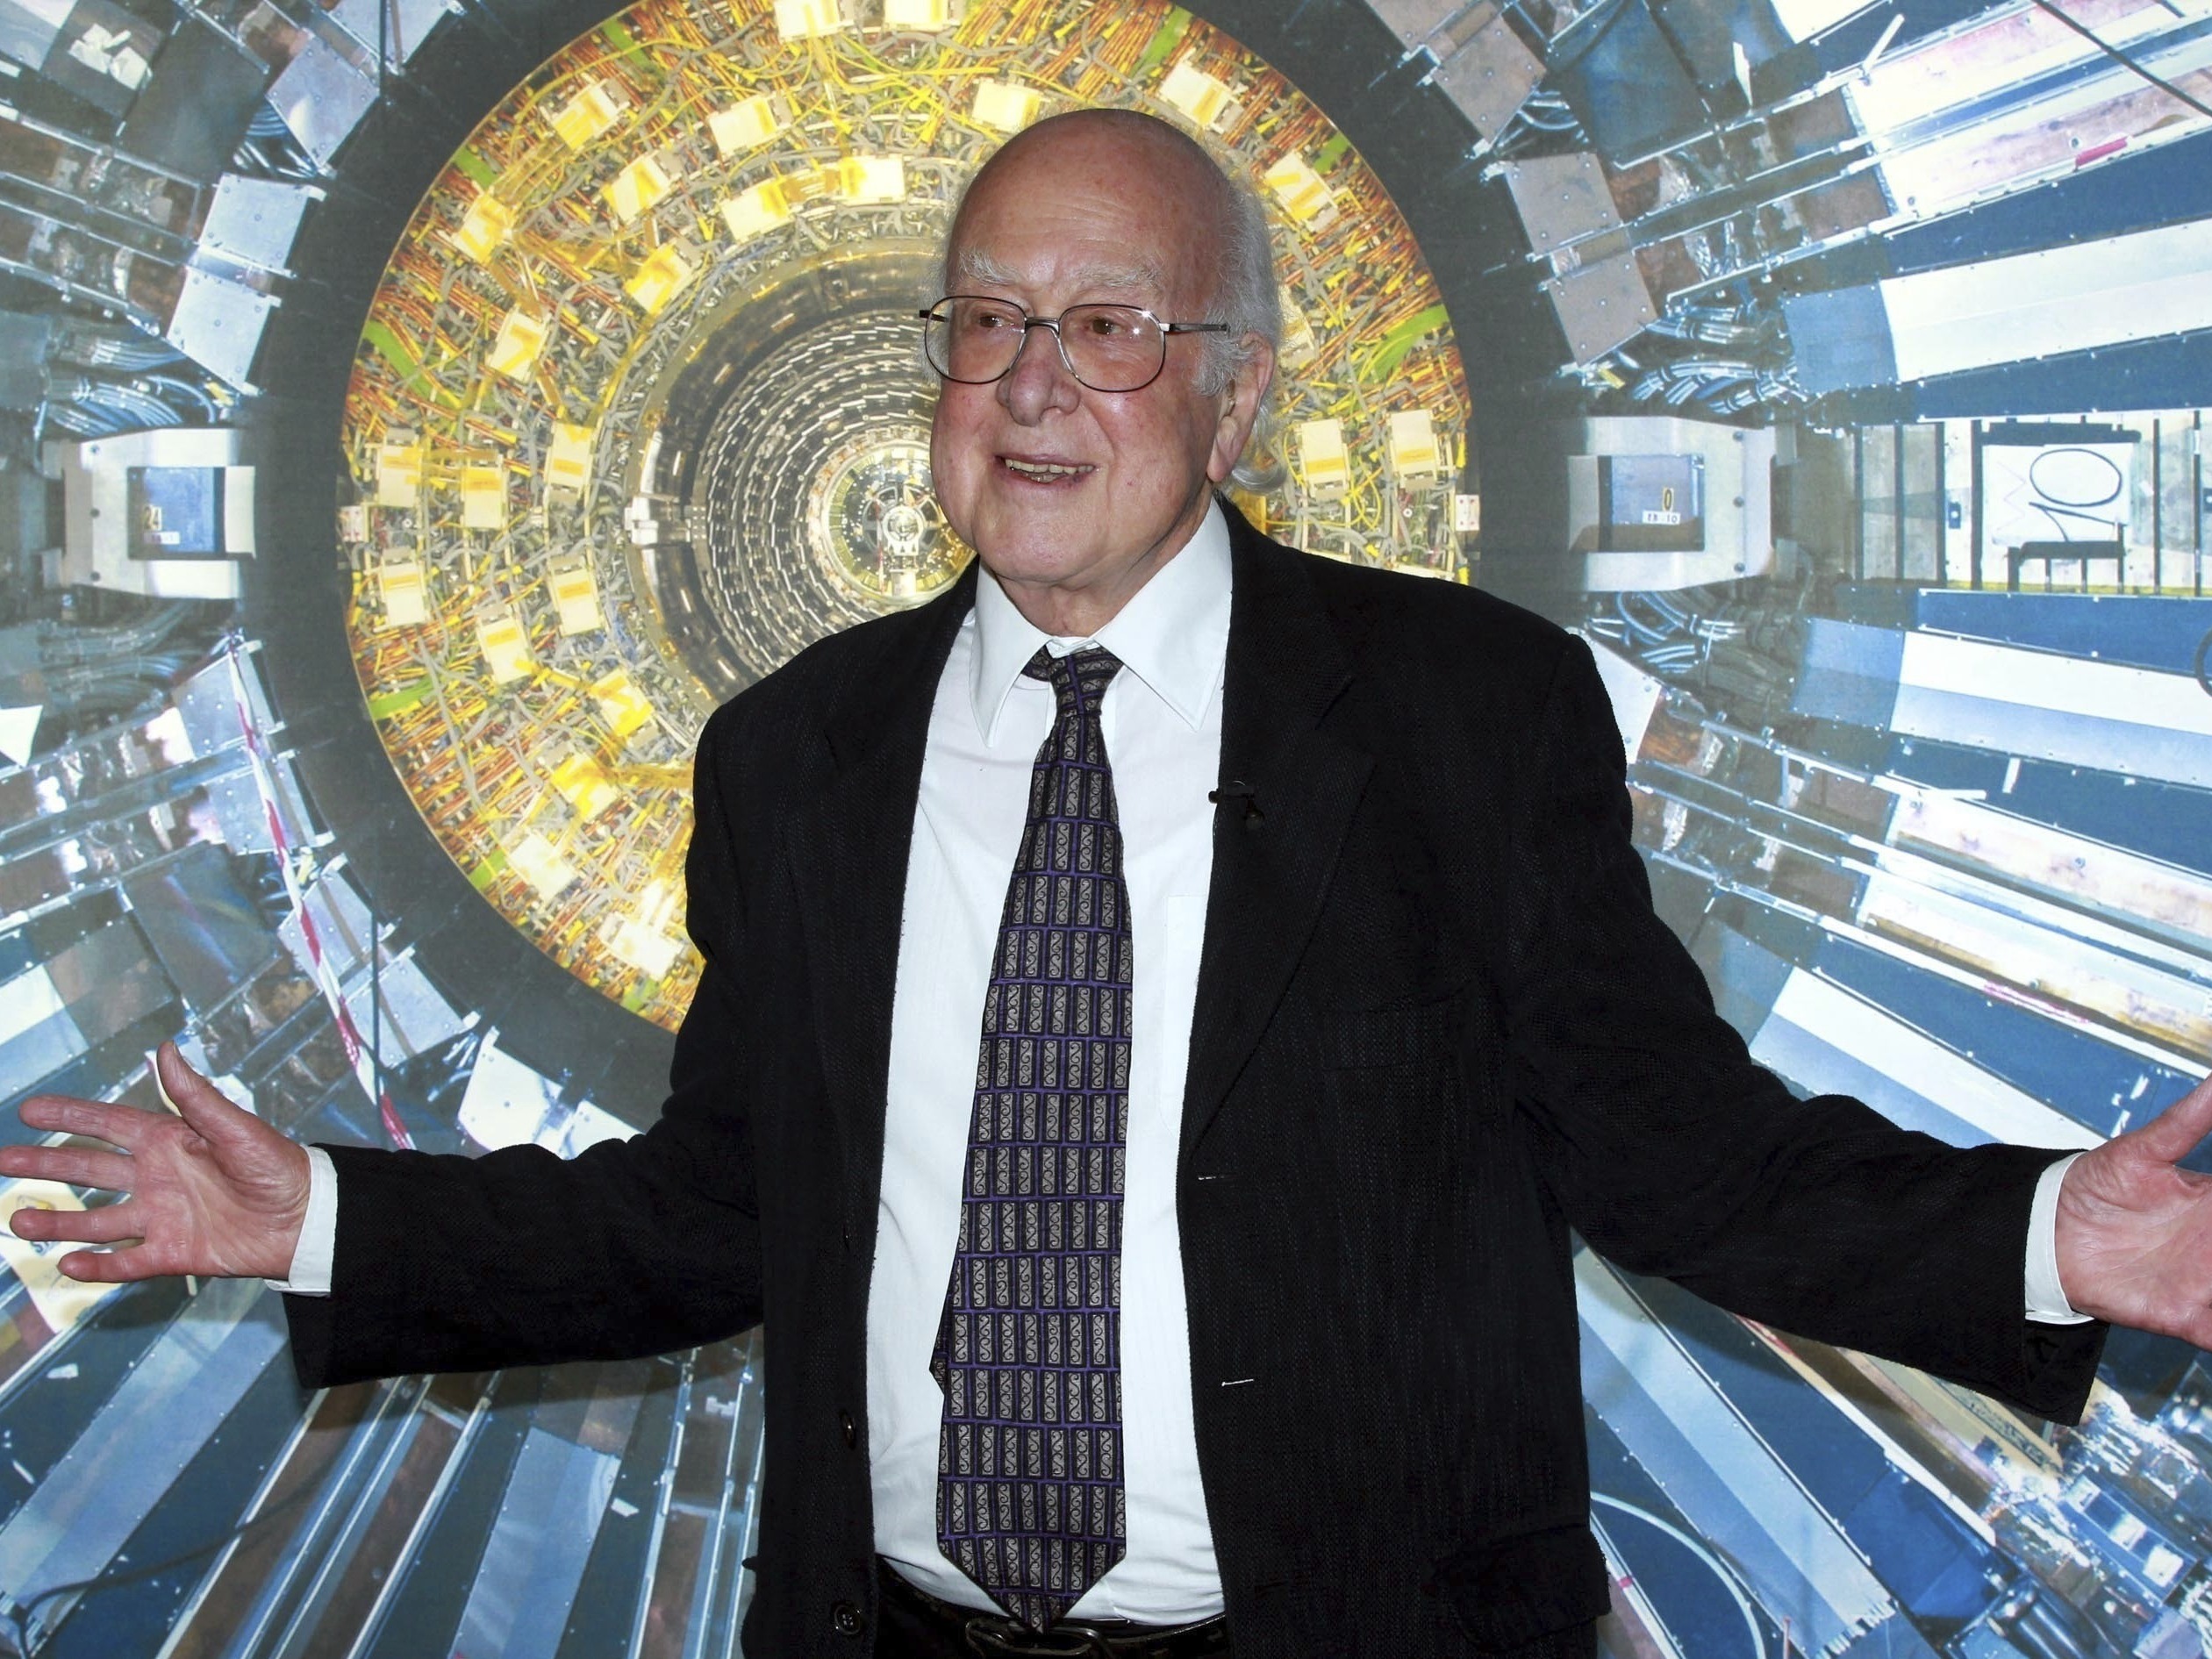 Peter Higgs, who proposed the existence of the so-called ‘God particle,’ has died